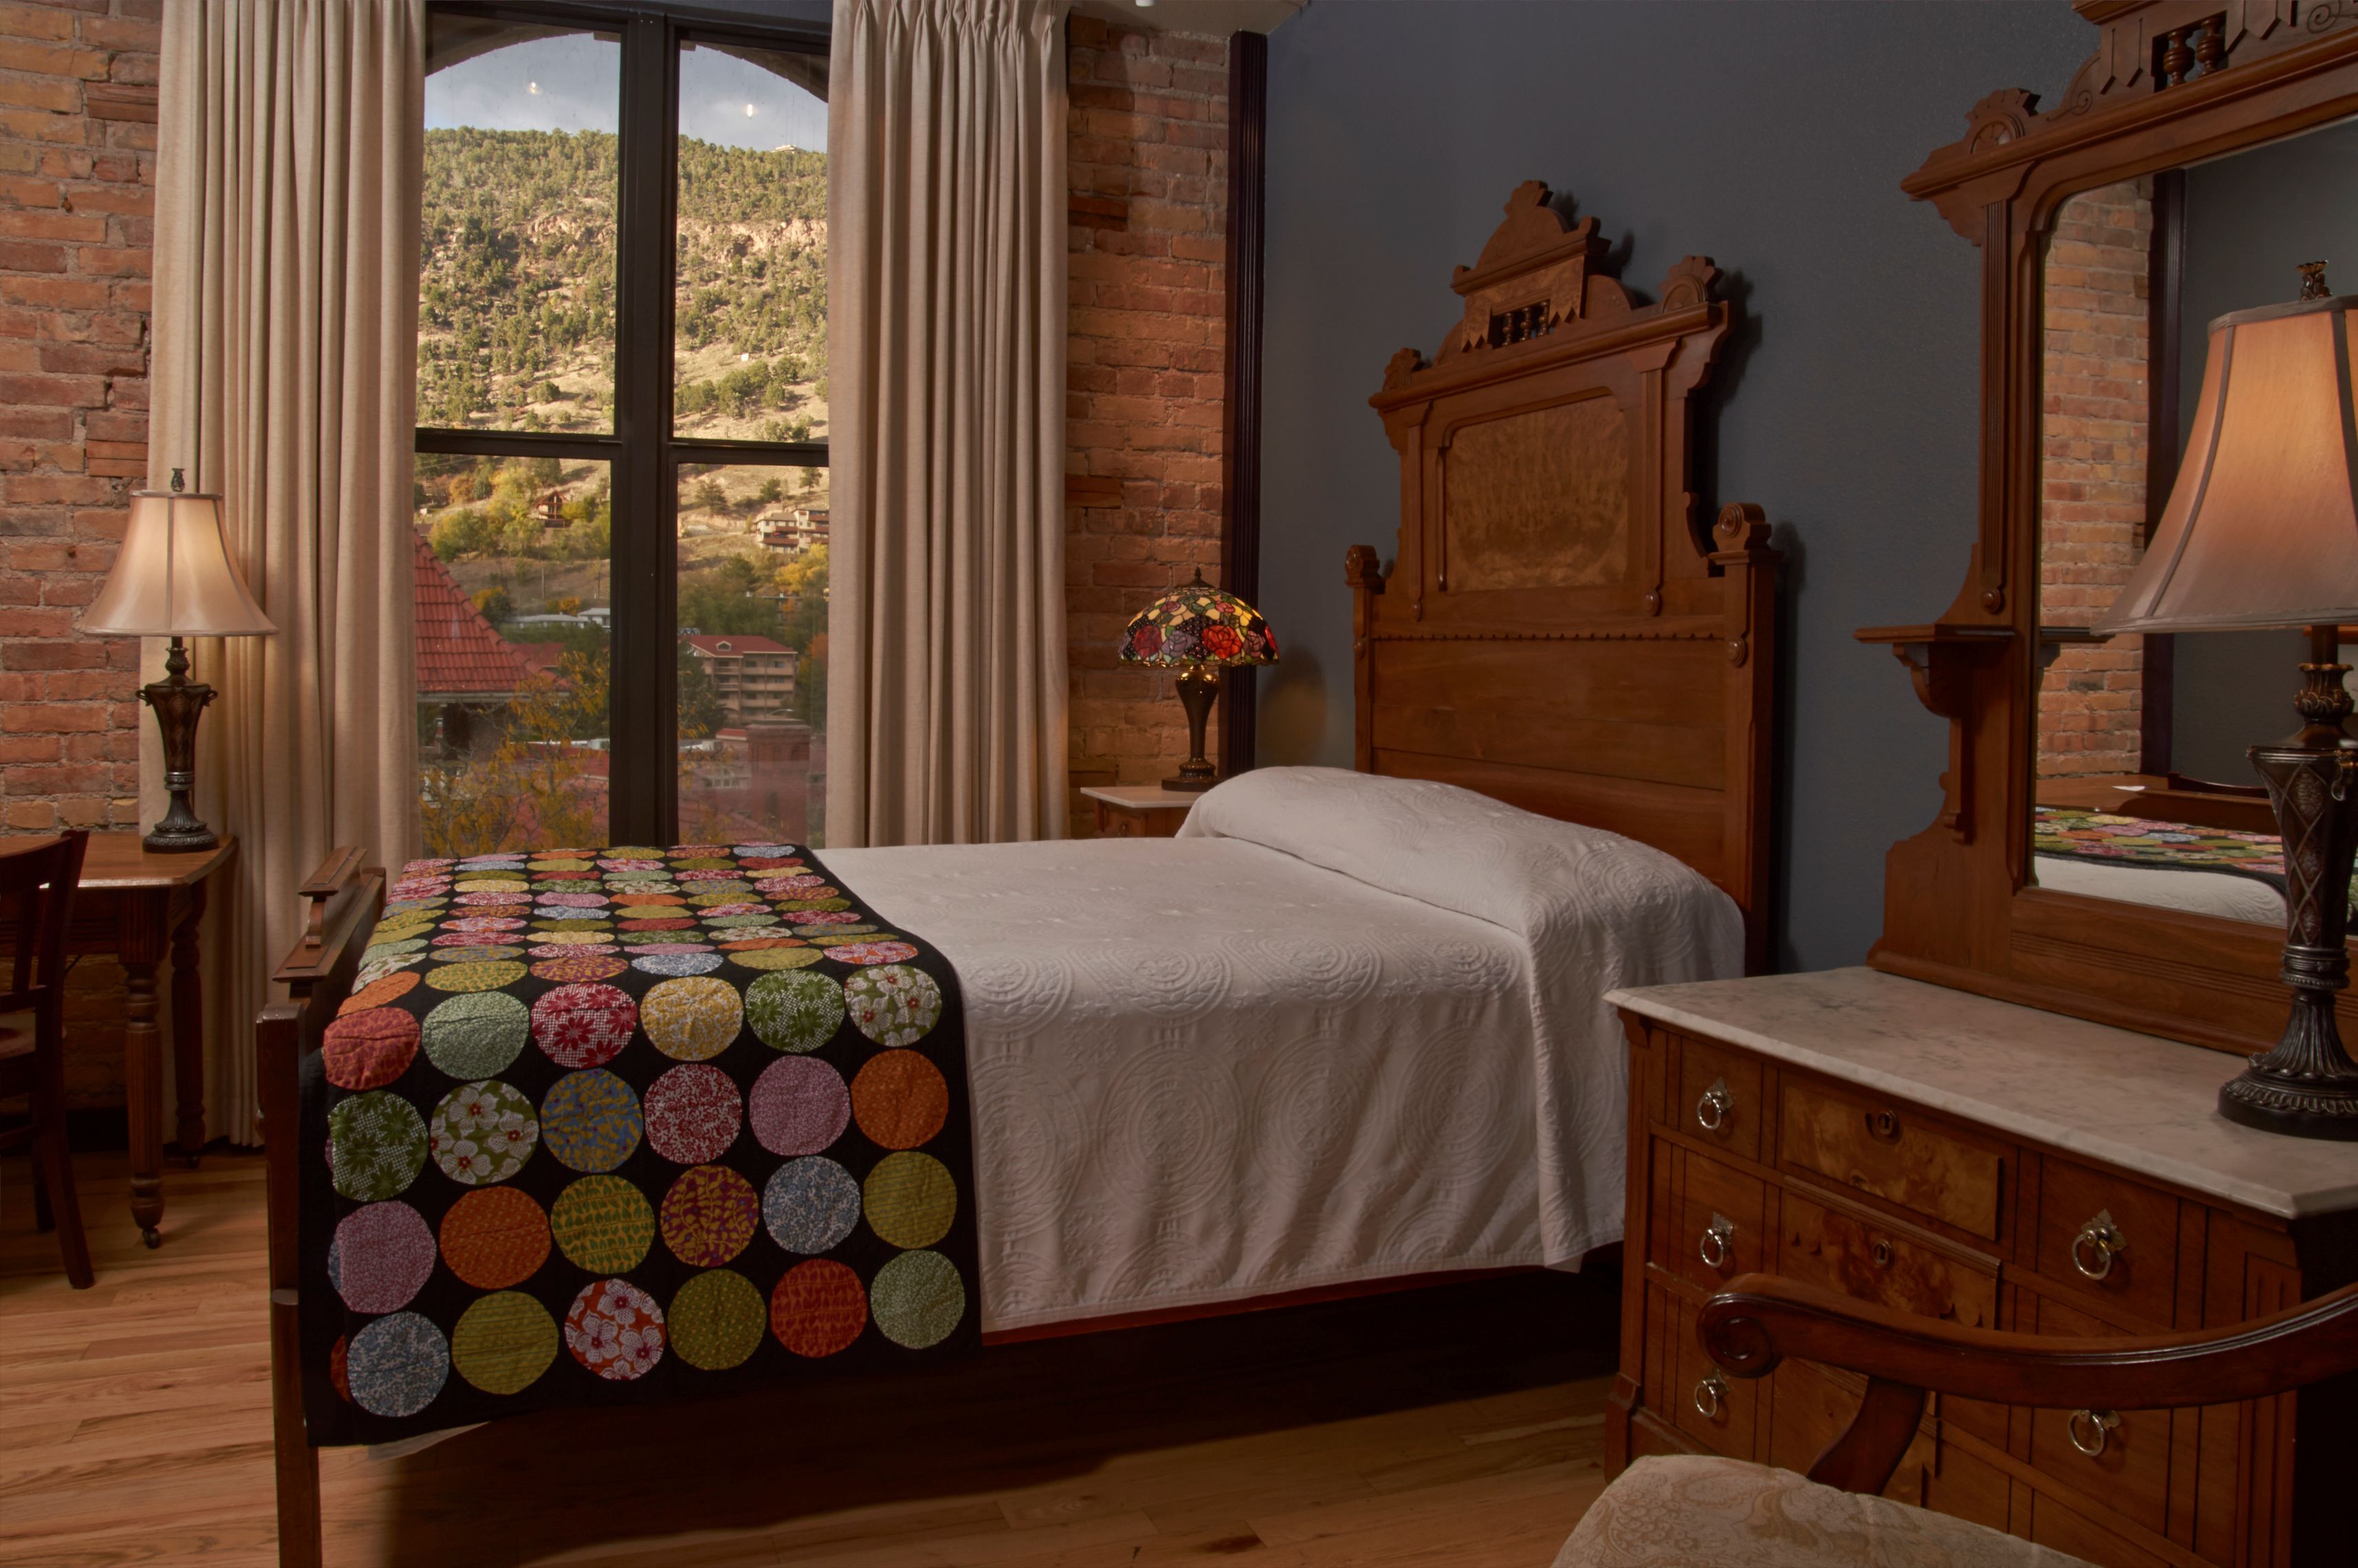 Today’s elegant, modern Hotel Denver is not just a place to sleep, but a place to absorb the current culture and the colorful past of Glenwood Springs.